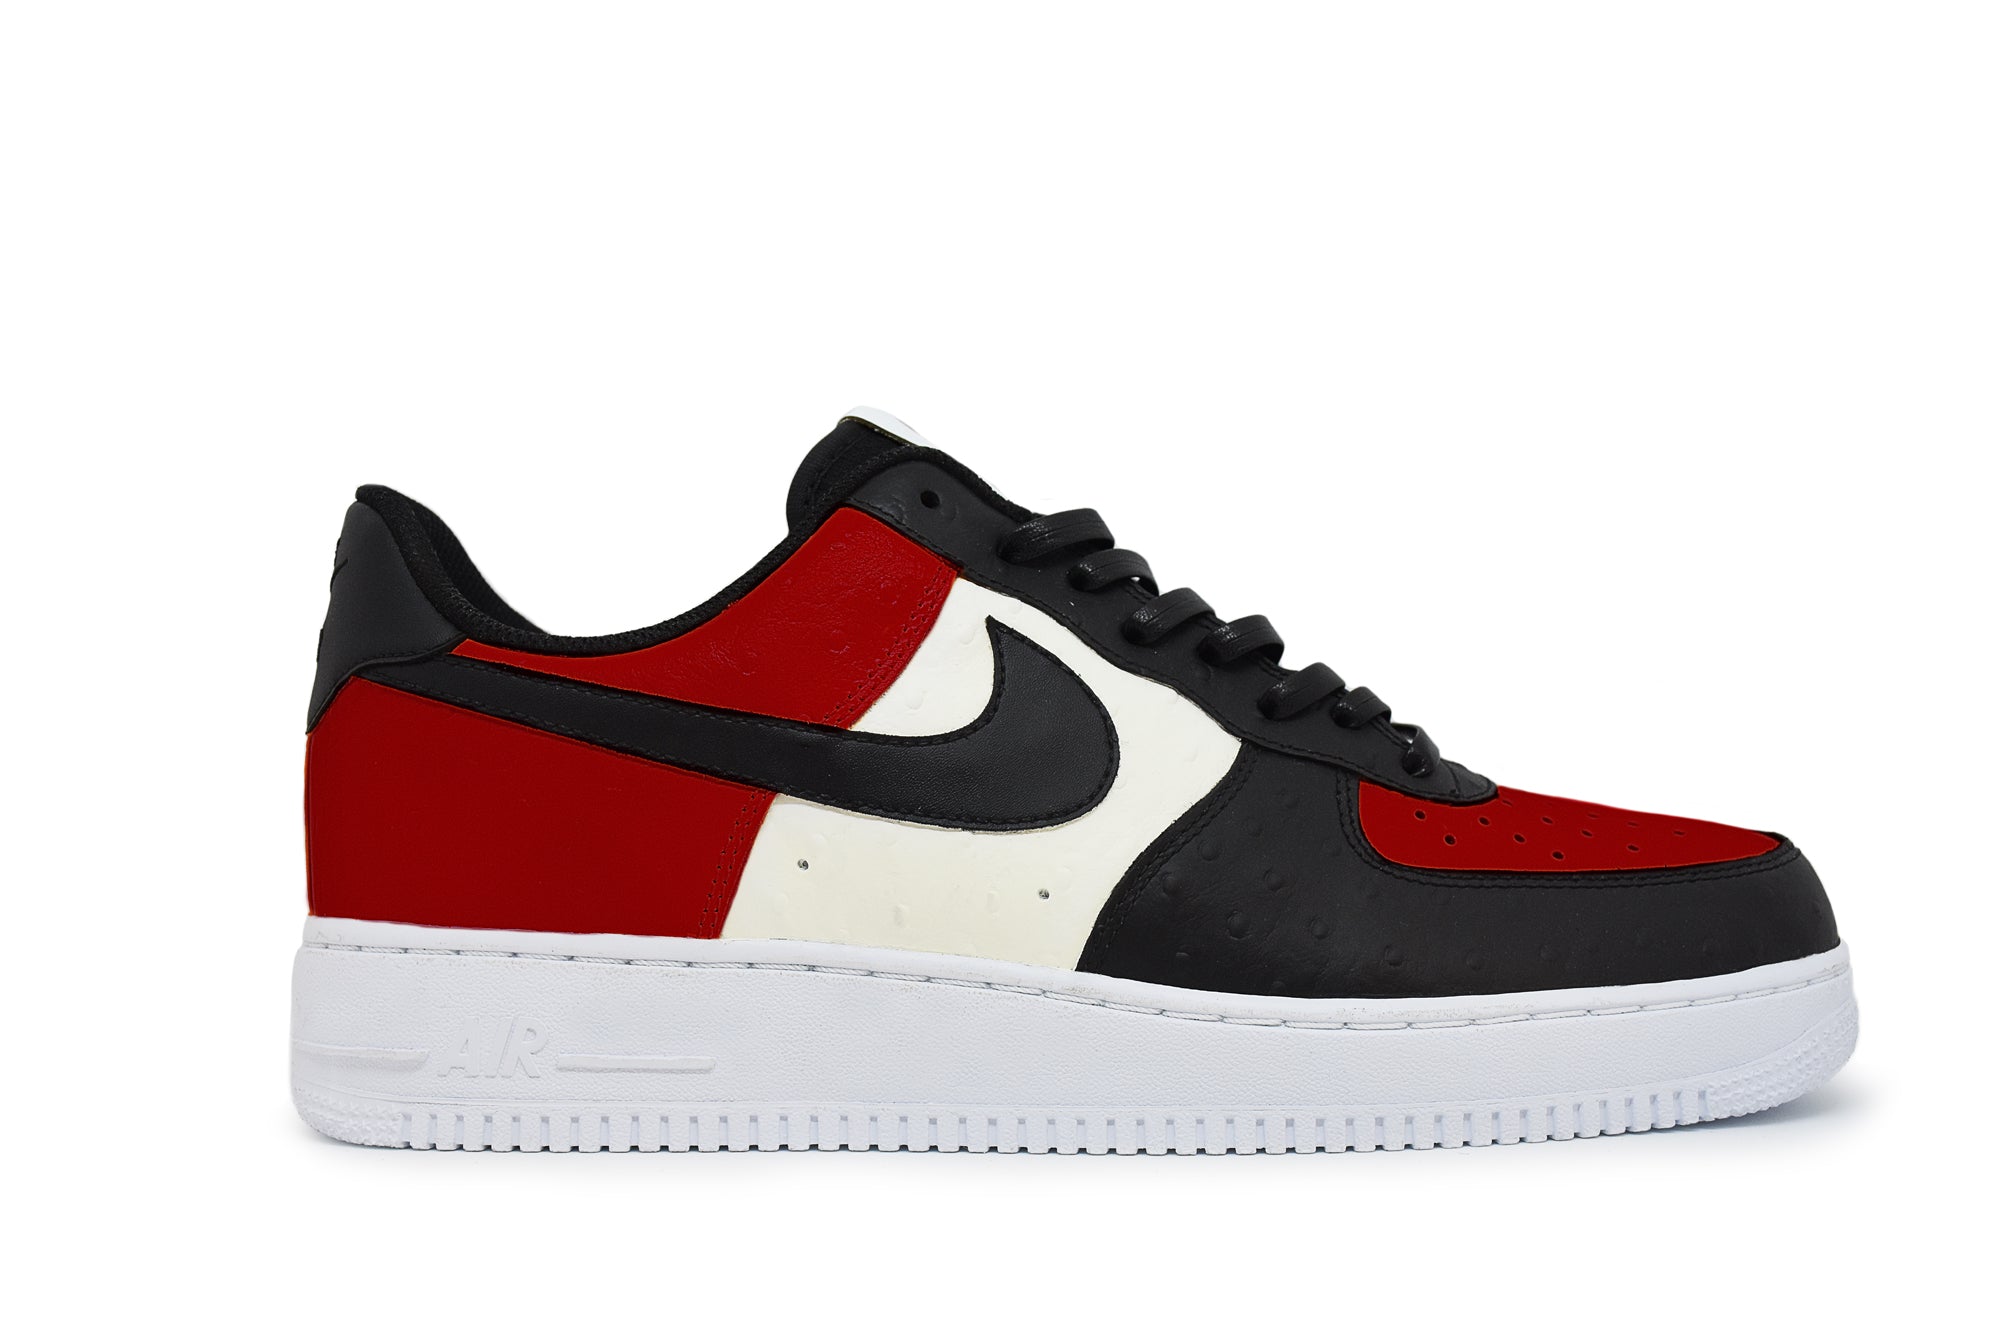 Ostrich Air Force 1 Low "Bred Toe" by TailorMade Customs